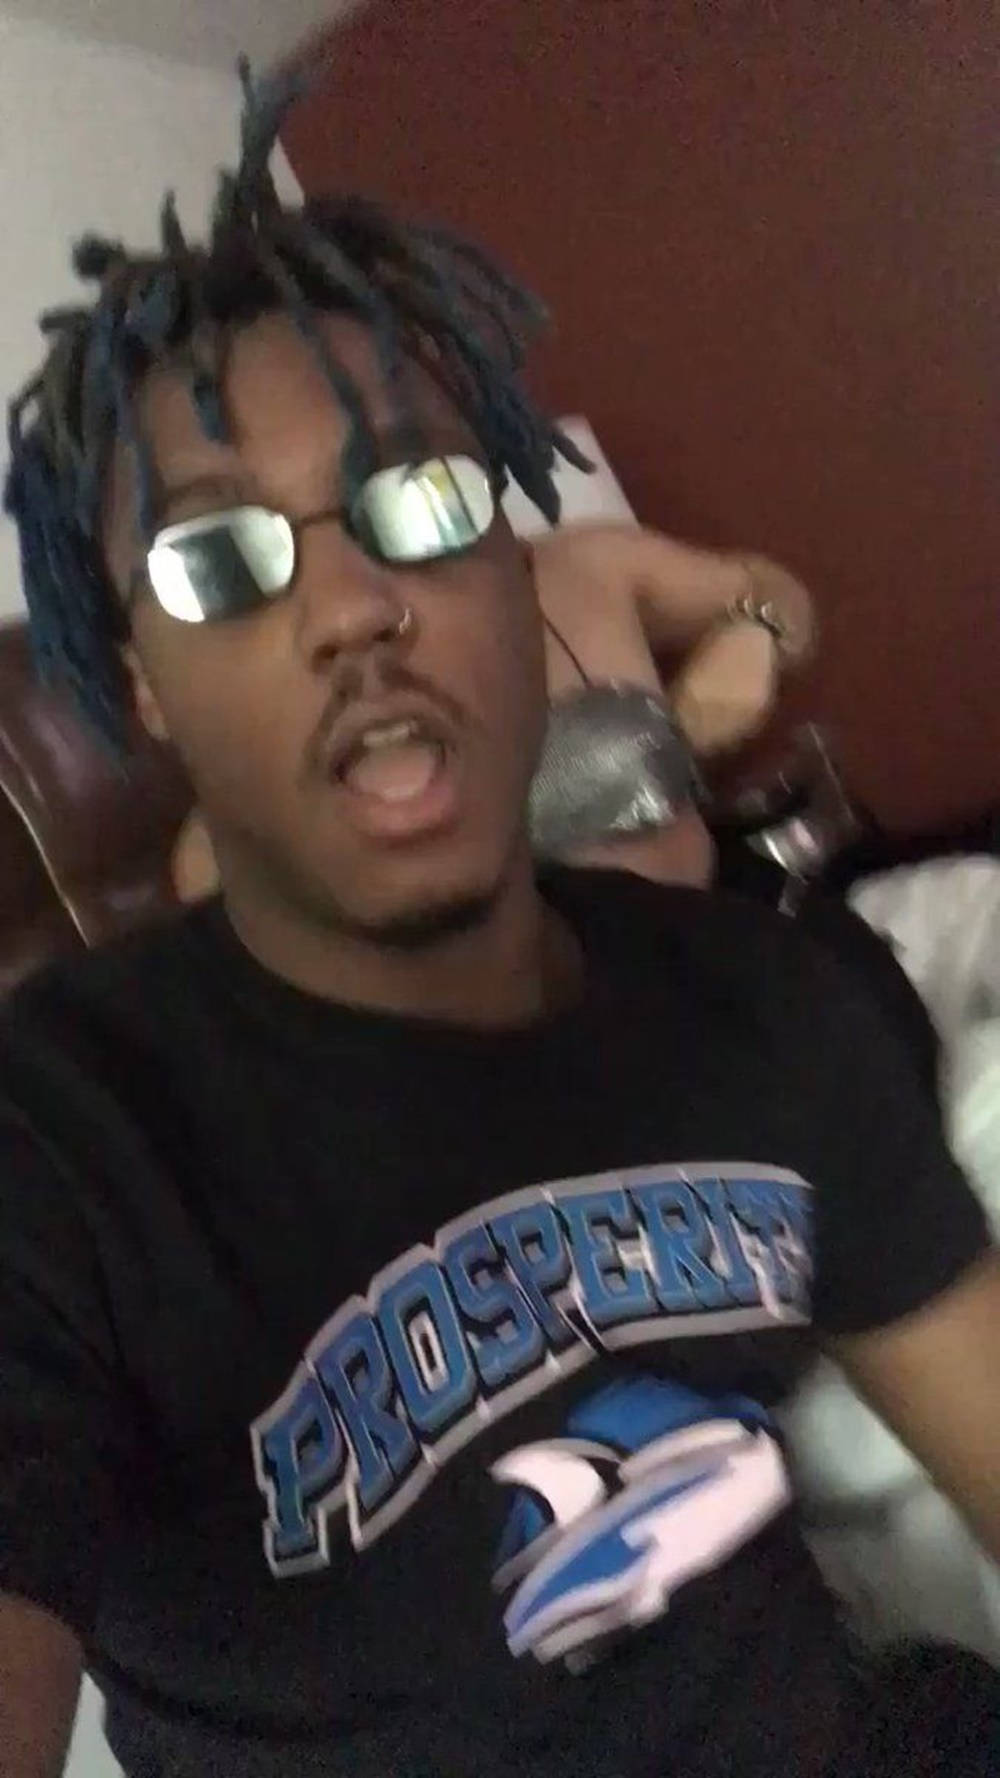 Juice Wrld 999 With Girl In Room